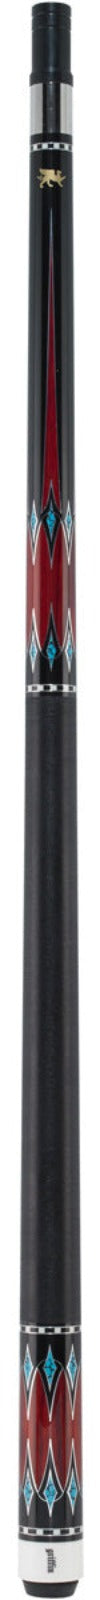 Griffin Griffin GR43 Pool Cue Pool Cue